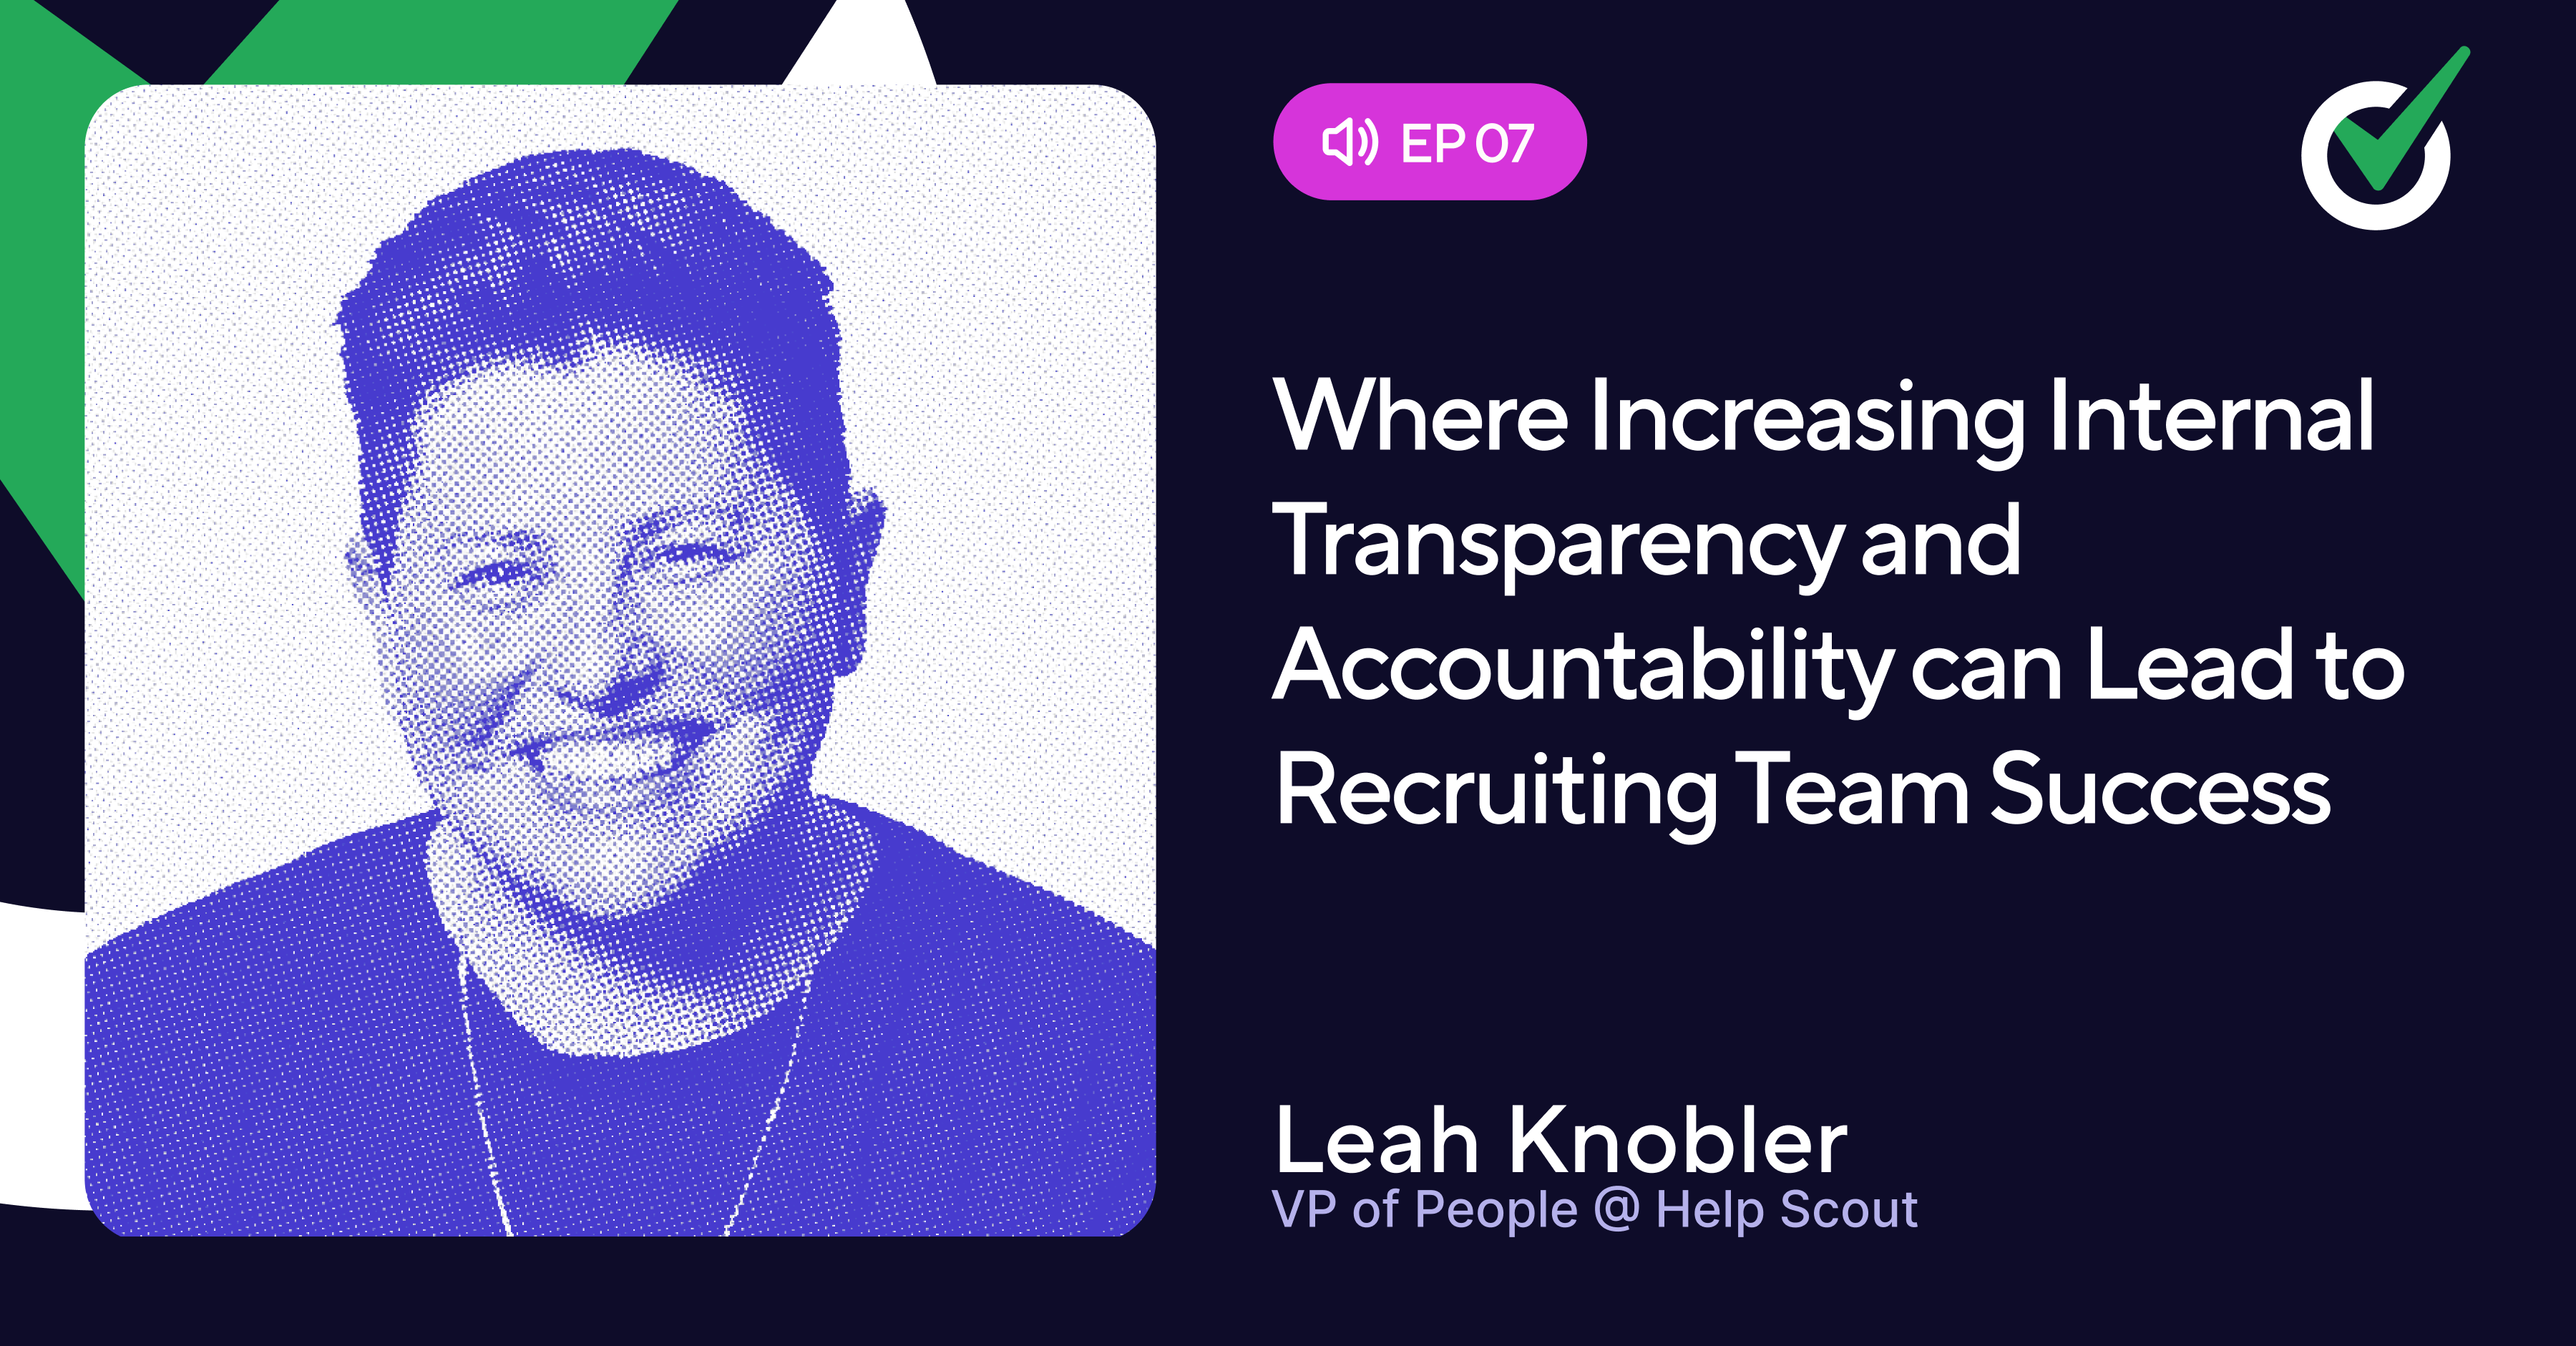 Episode 7 - Where Increasing Internal Transparency and Accountability Can Lead to Recruiting Team Success